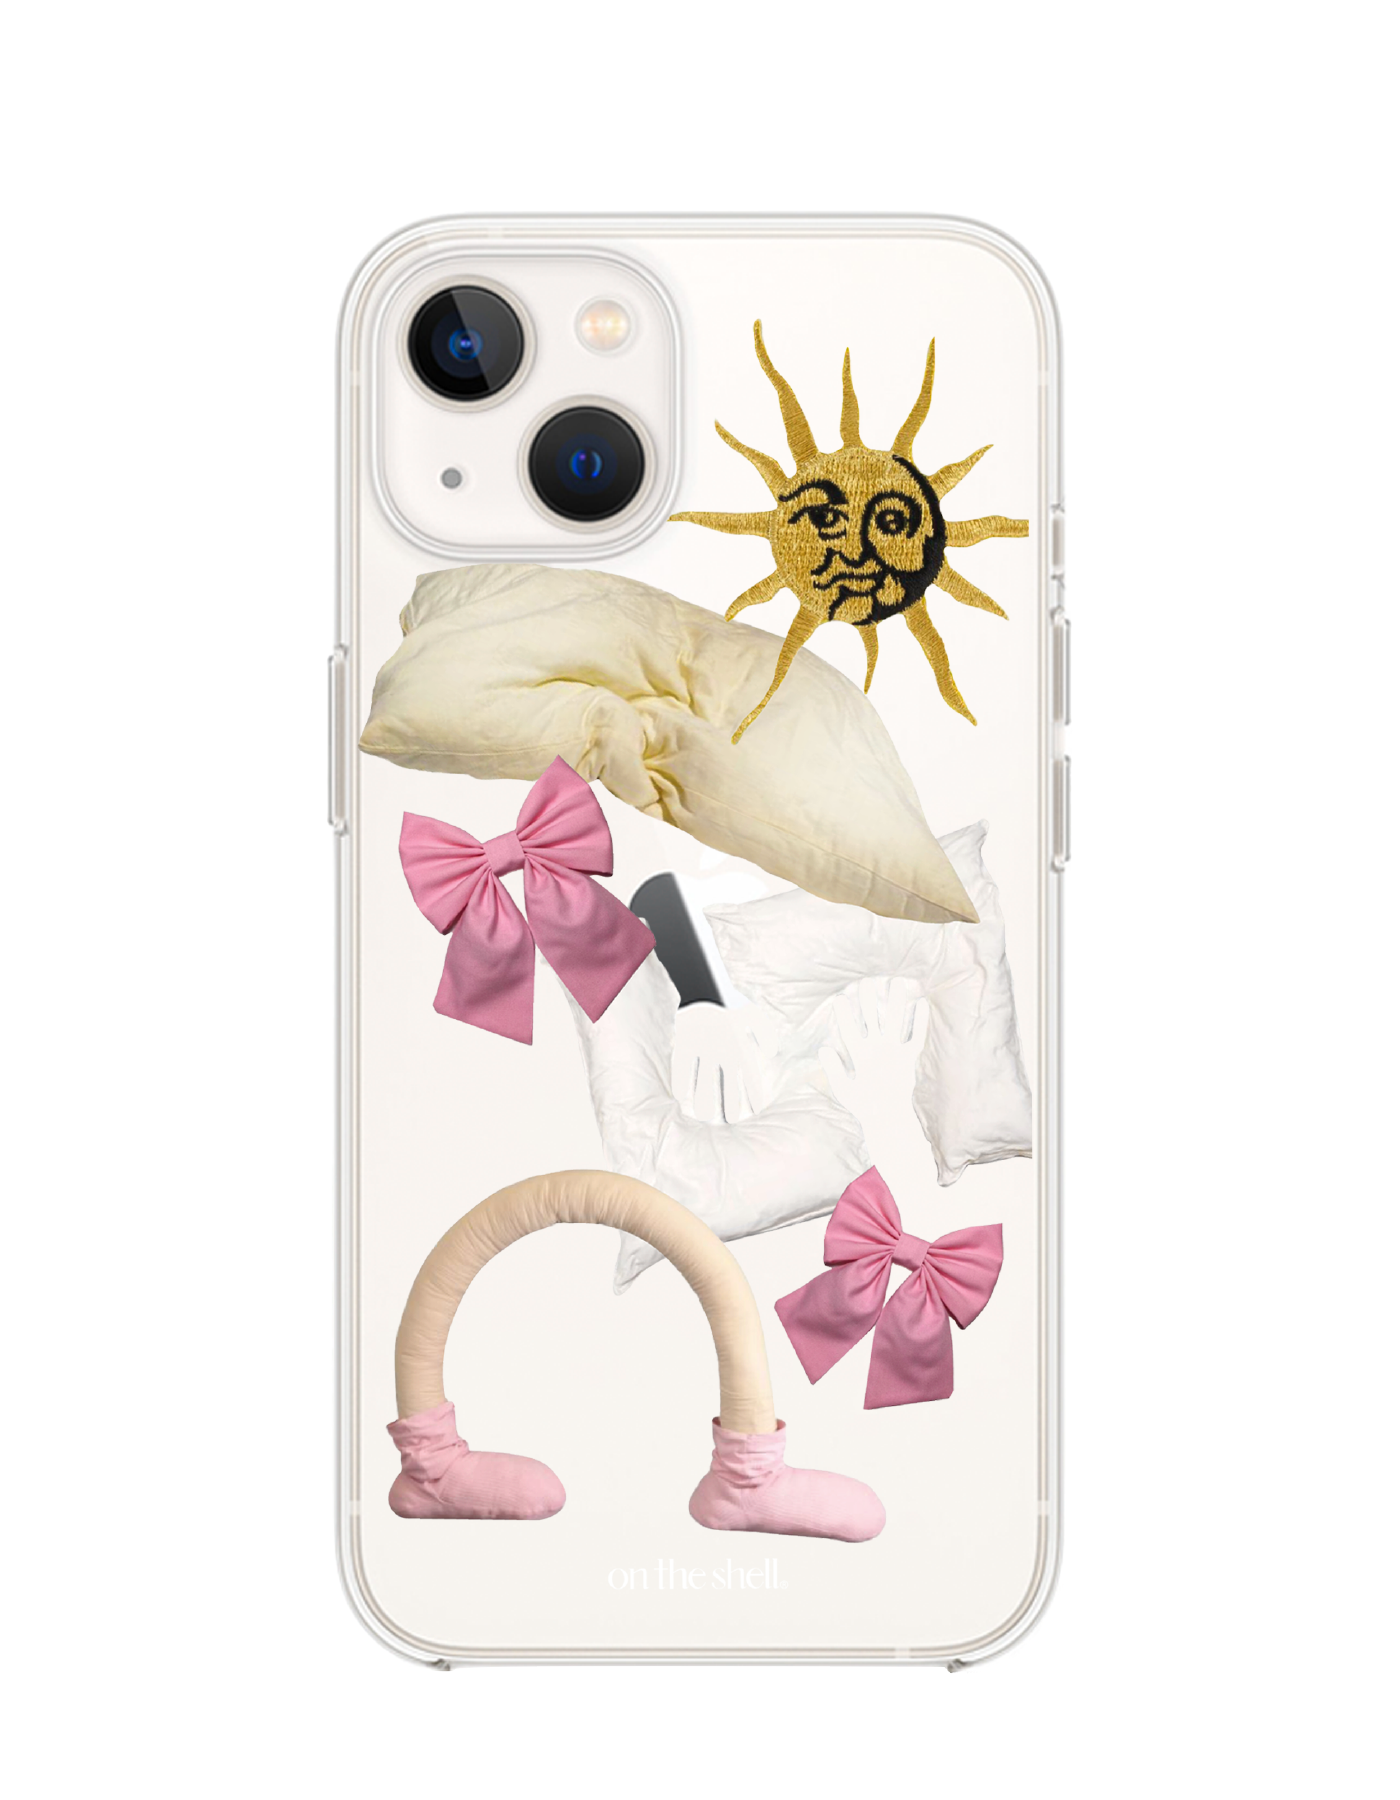 (Jell hard) Sunrise and cottons Iphone case